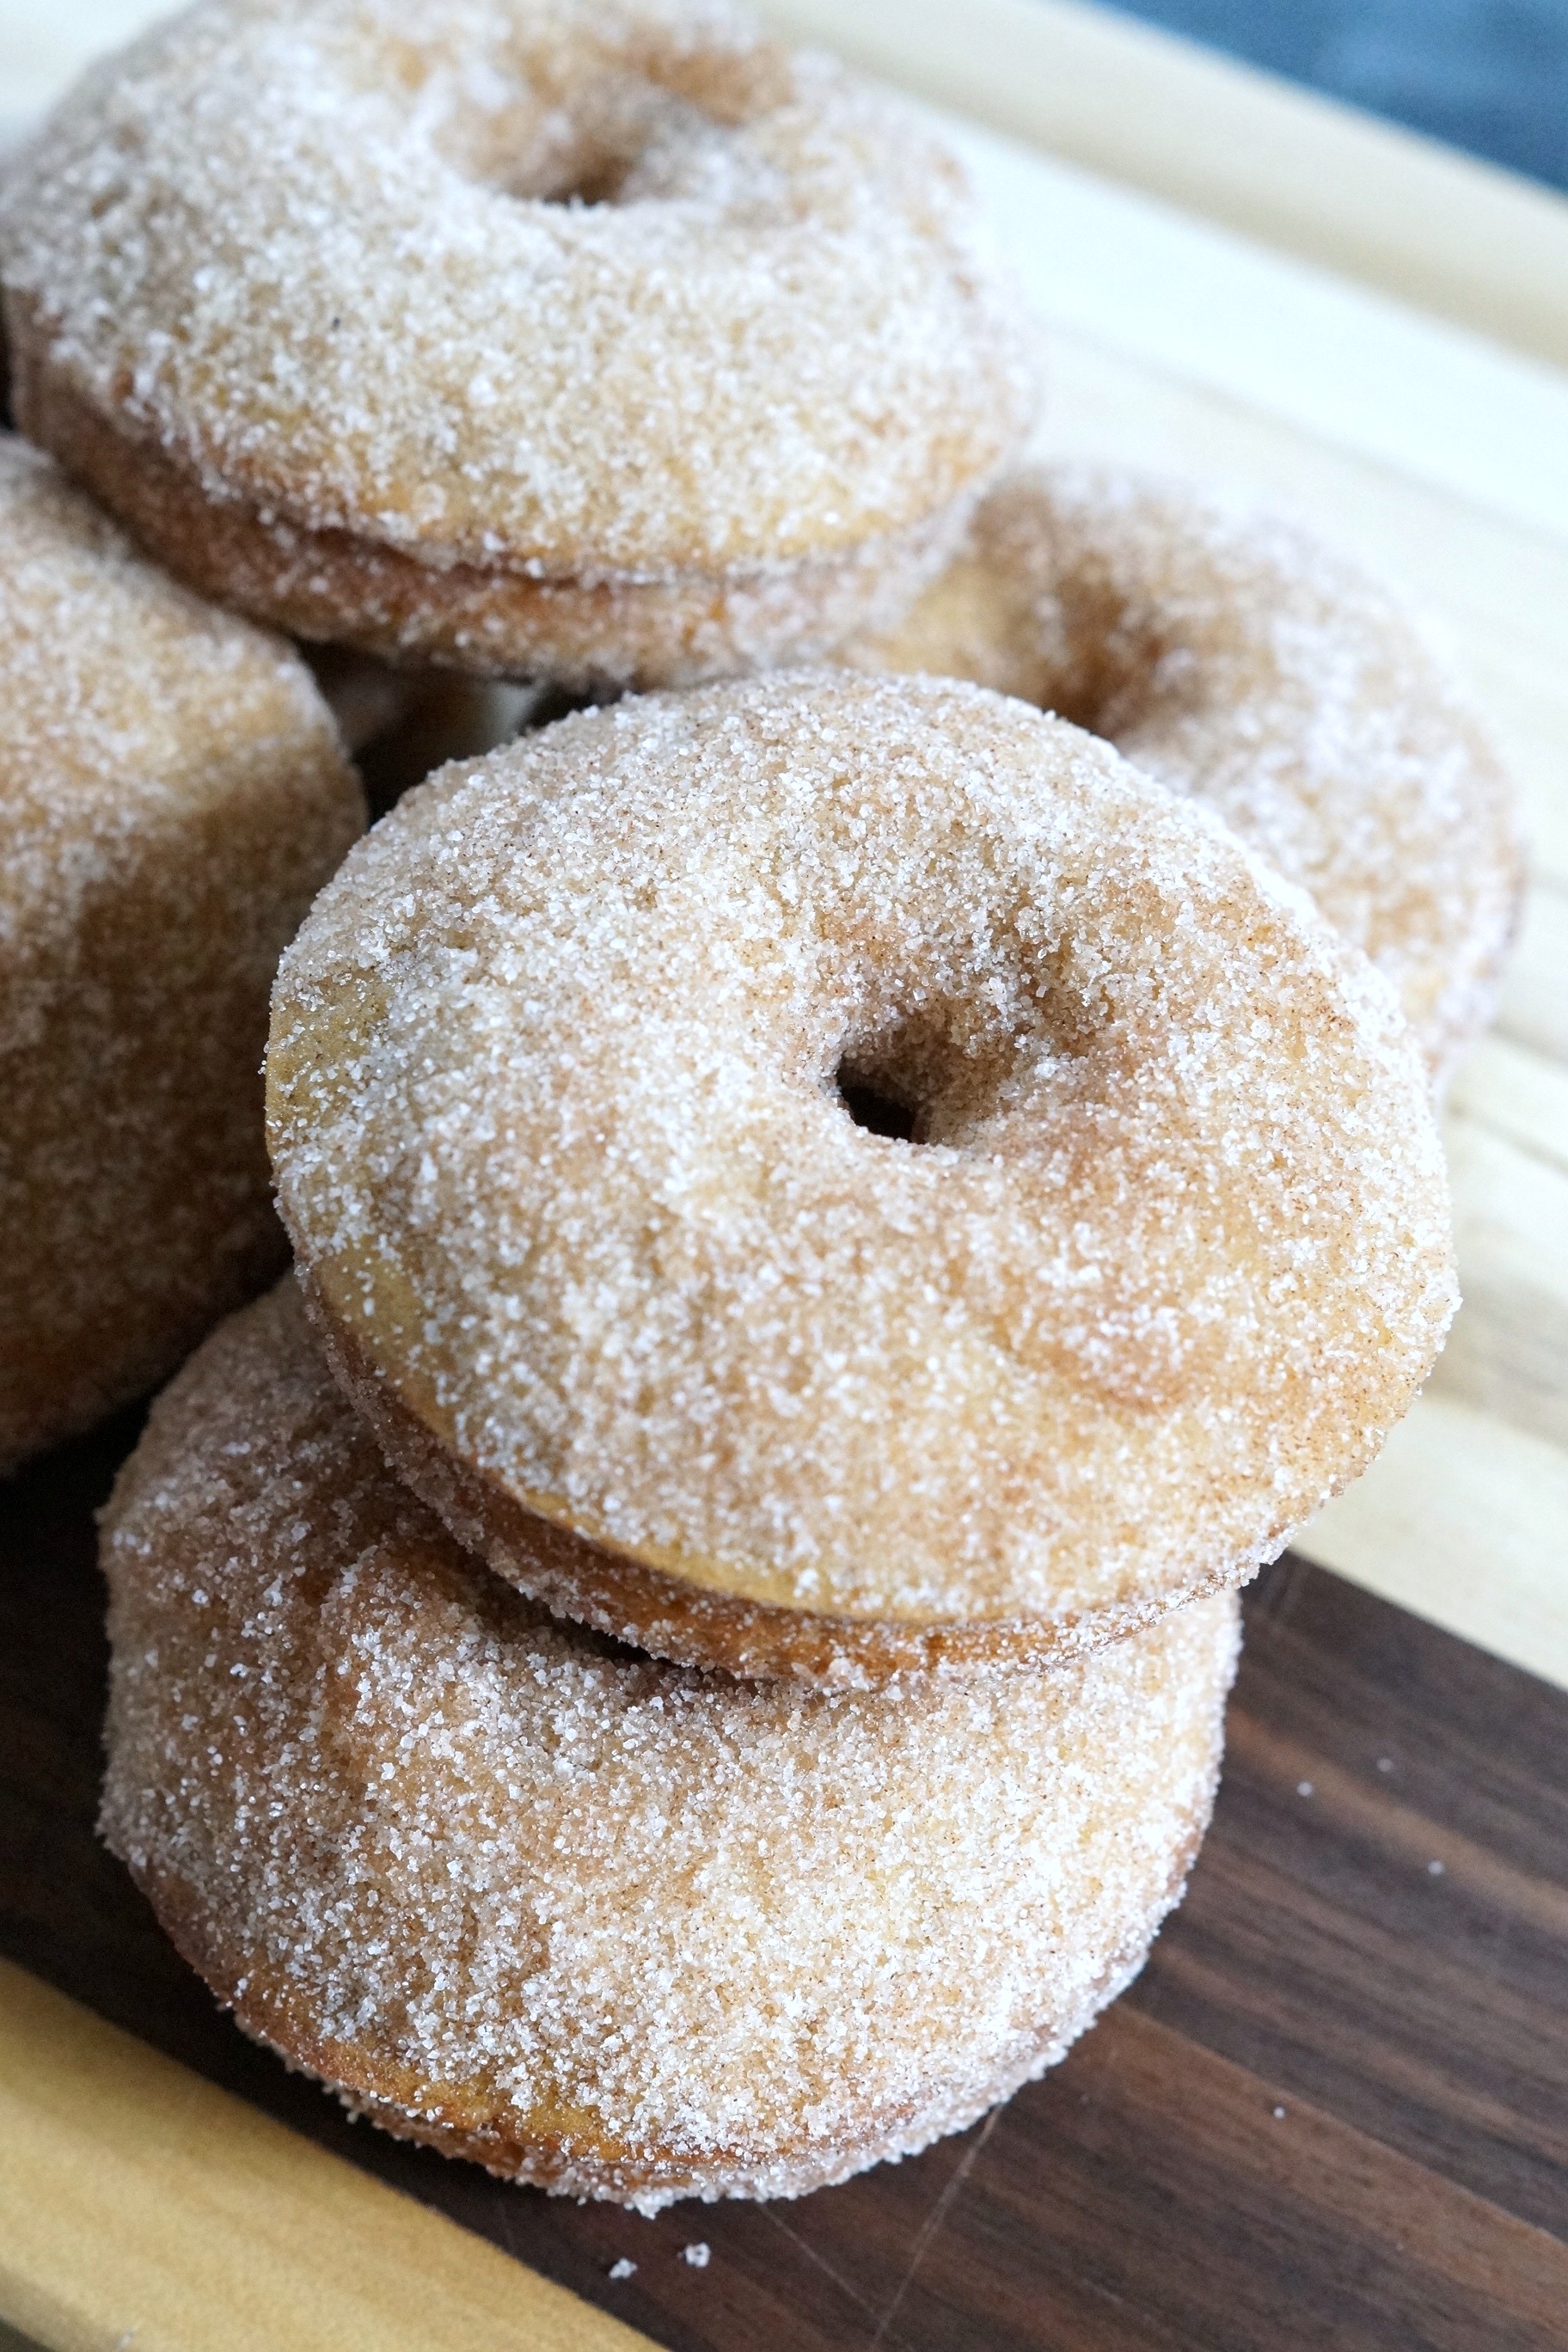 Learn how to make cinnamon sugar baked donuts by following this simple recipe! Cinnamon sugar baked donuts are perfect for lazy weekends!